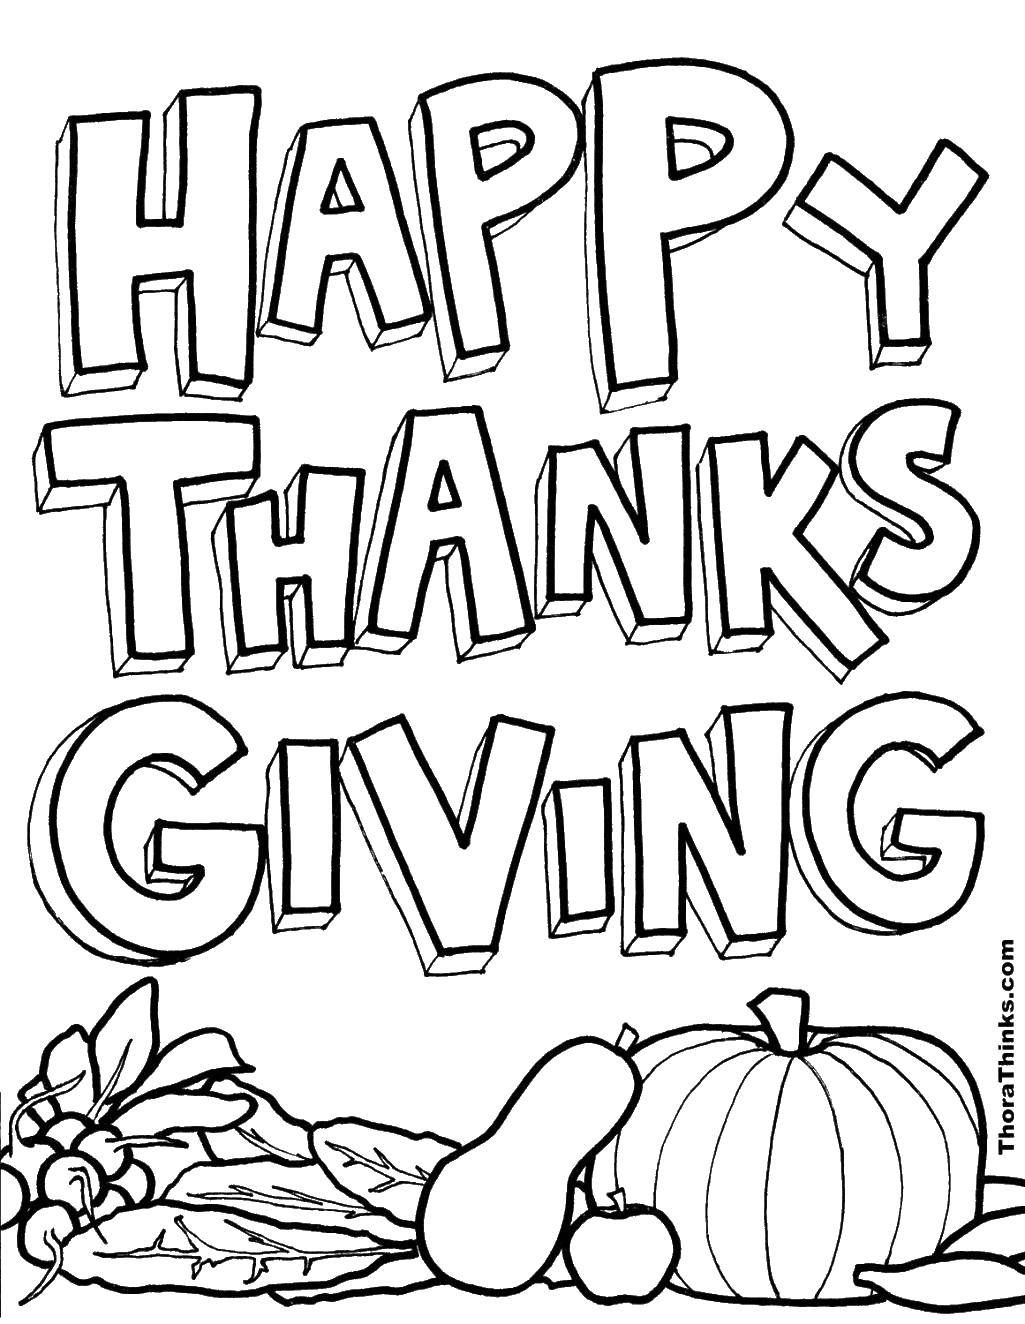 Coloring Happy thanksgiving. Category holiday. Tags:  Thanksgiving, Turkey, holiday.